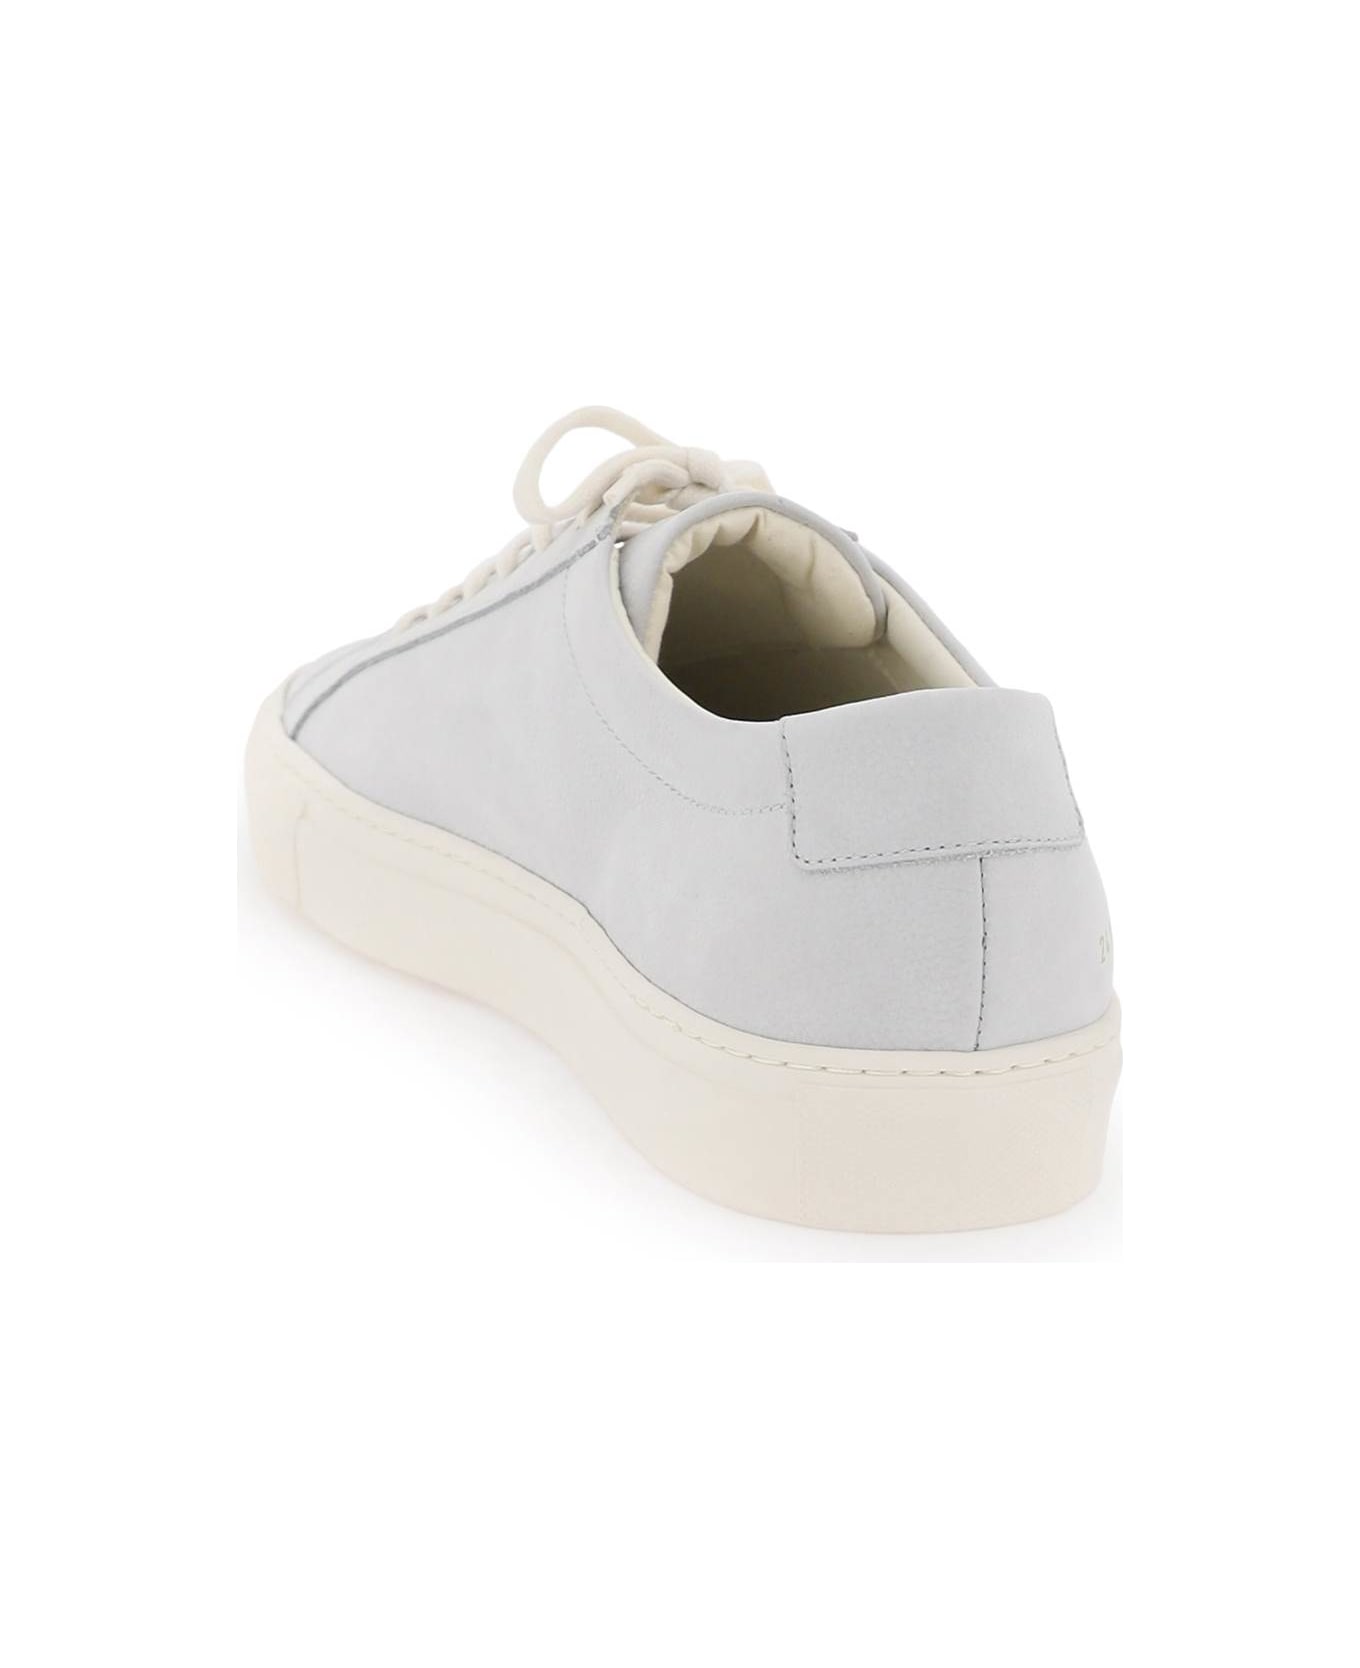 Common Projects Original Achilles Sneakers - GREY (Grey) スニーカー